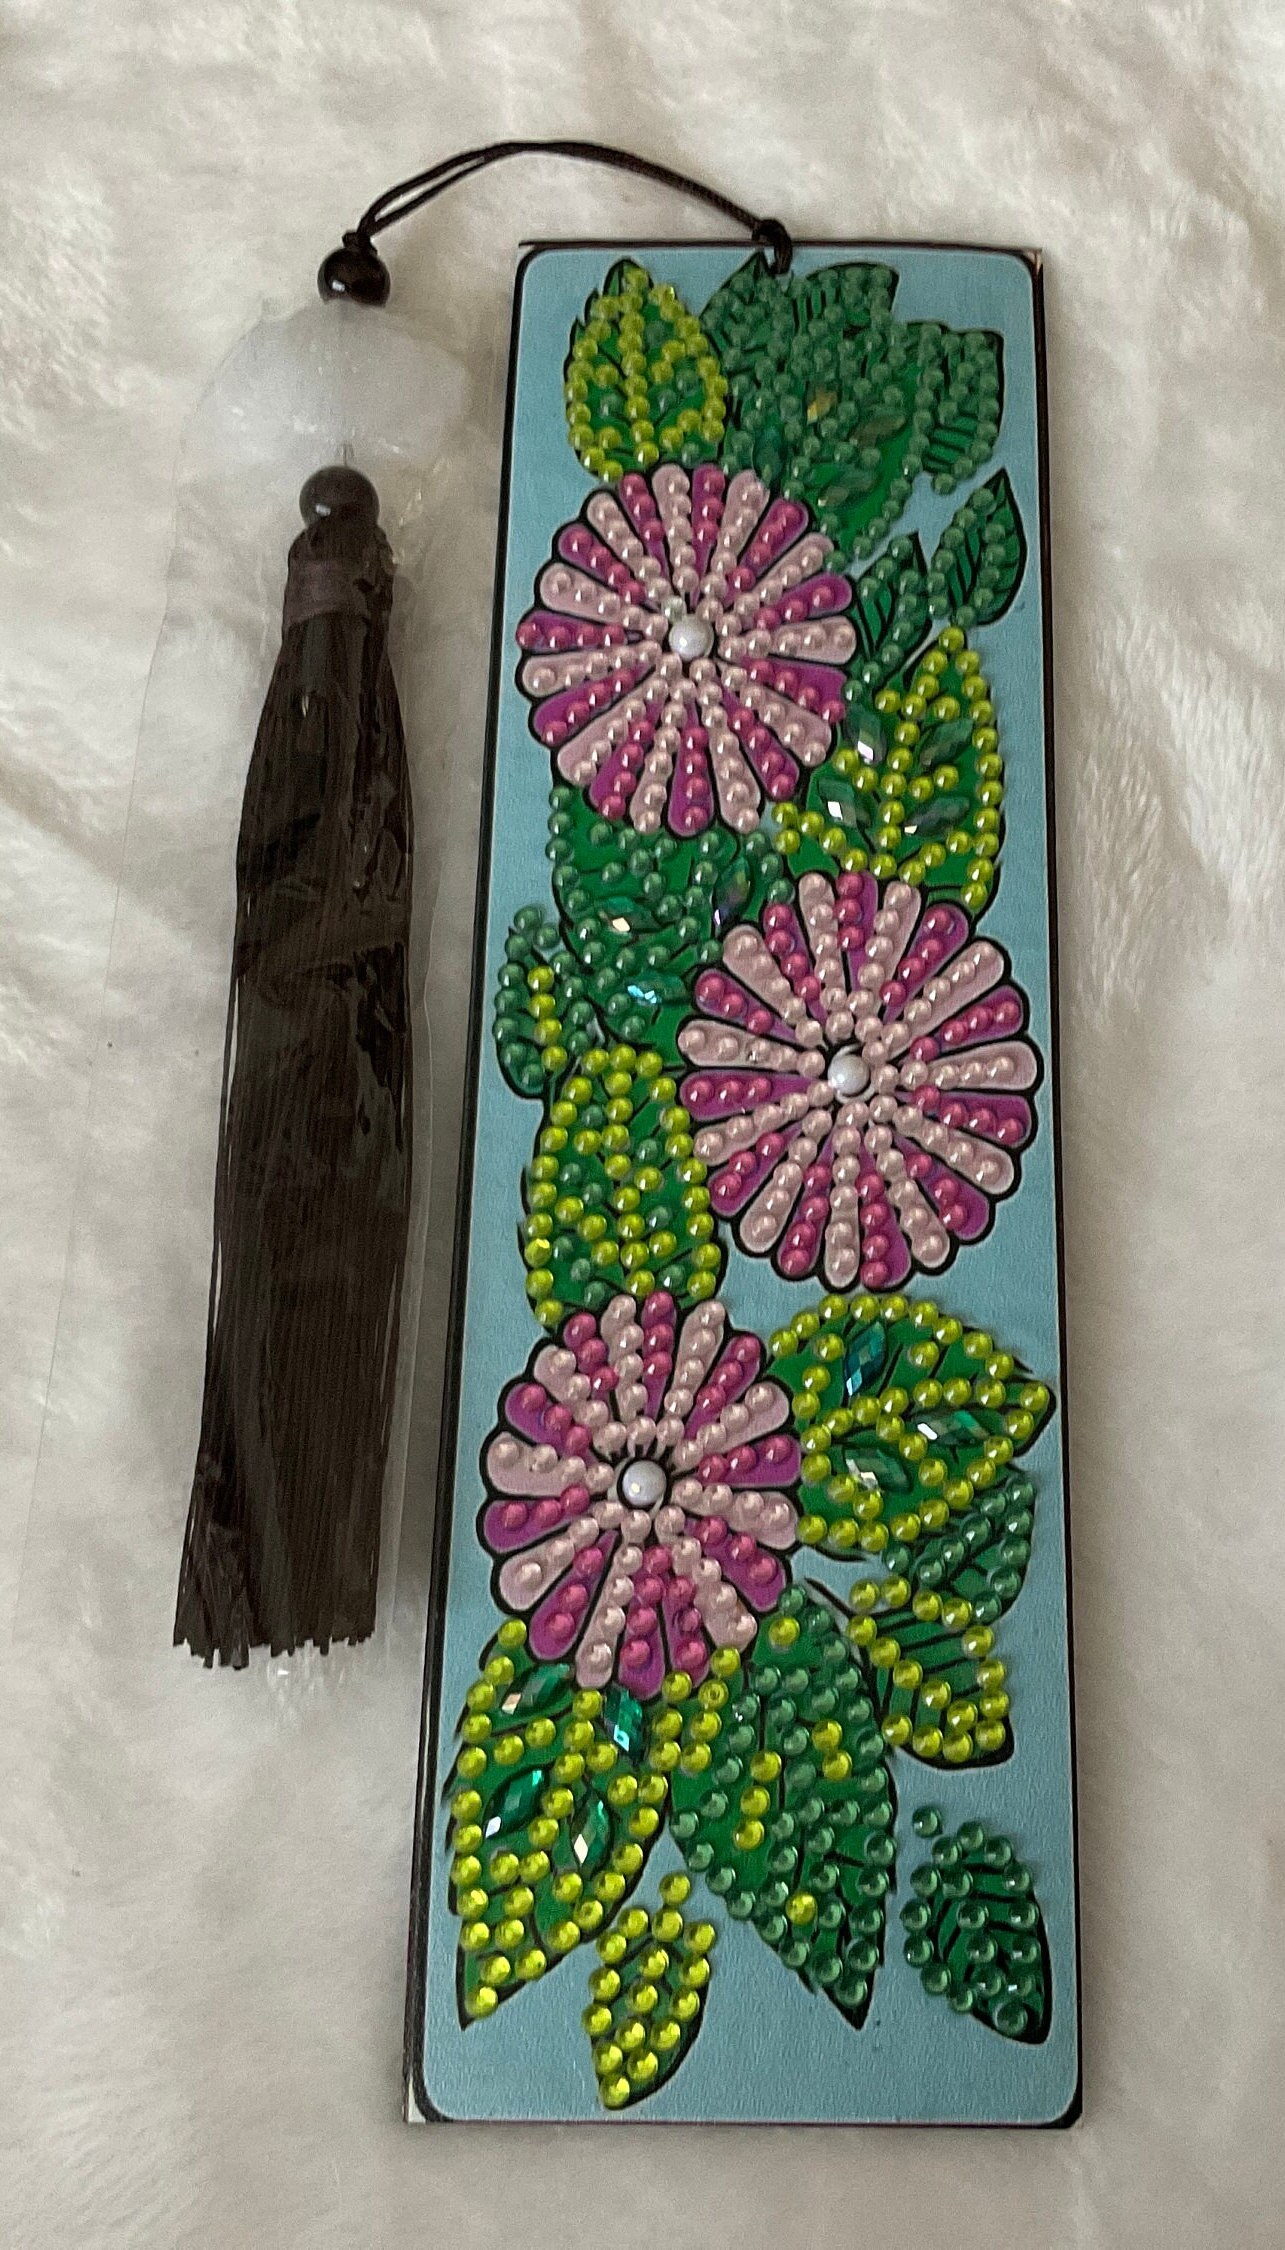 Assembled Diamond Painting Bookmark Different Designs Available 